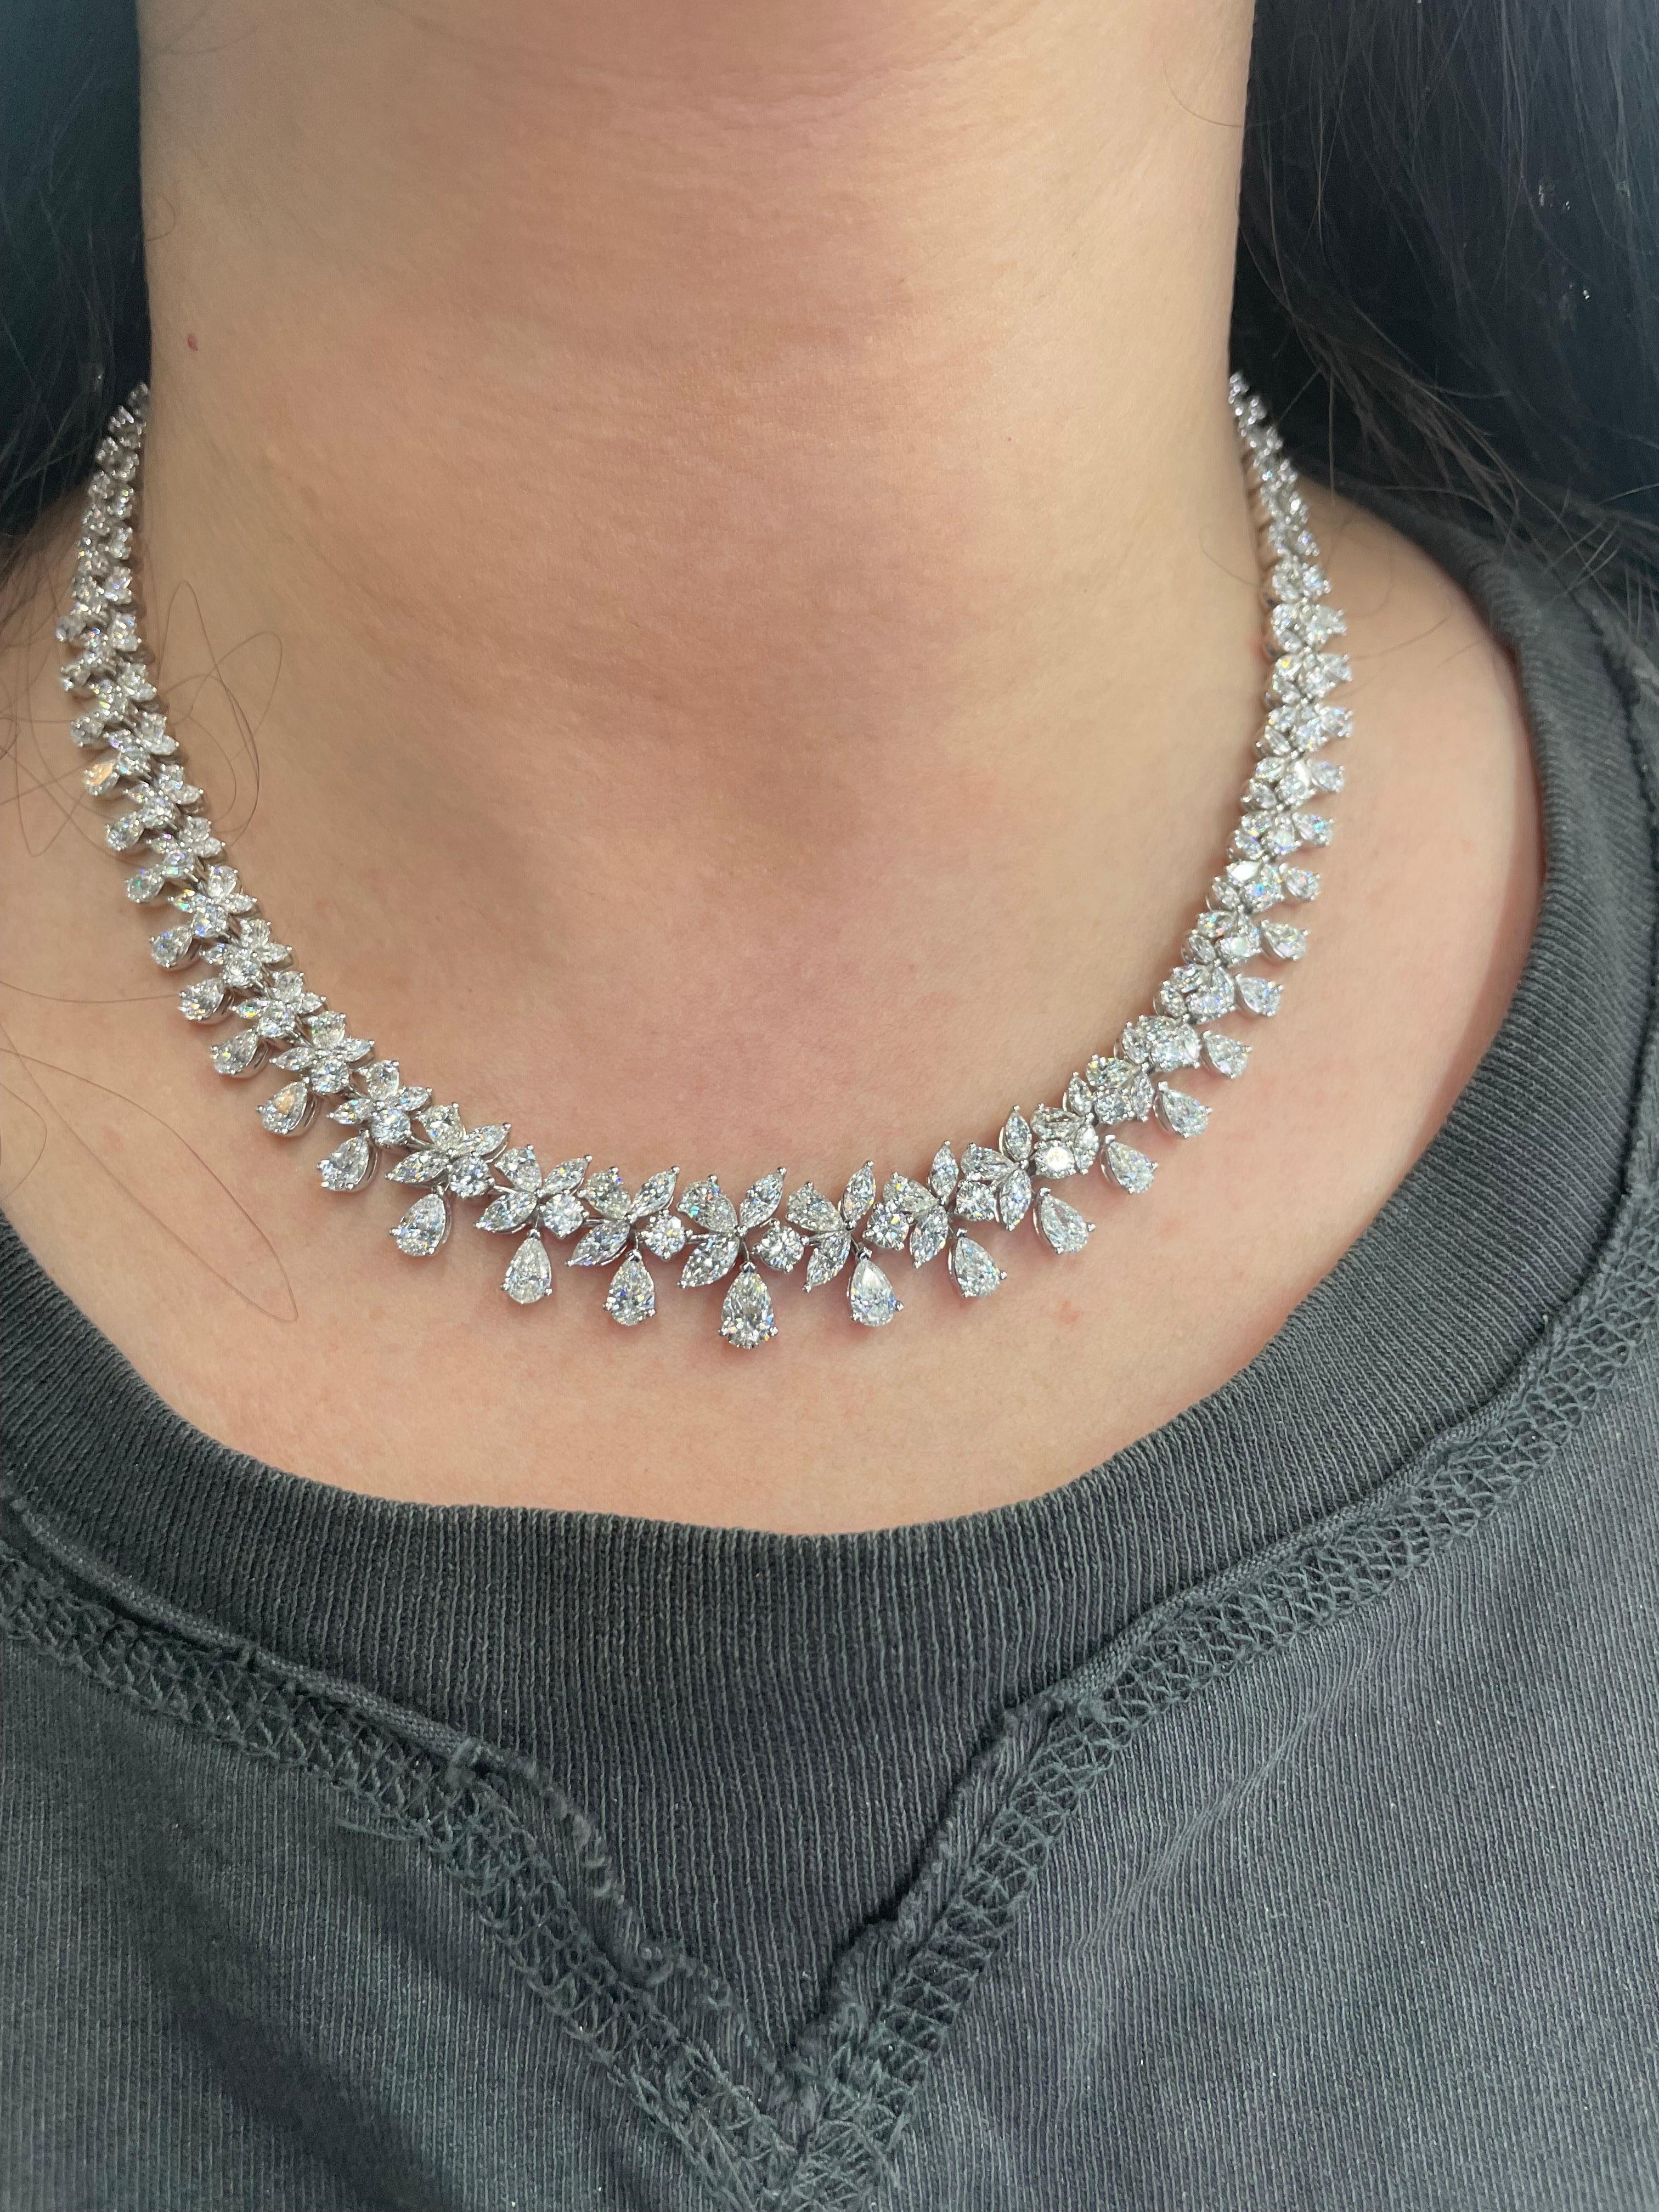 Diamond Floral Cluster Drop Necklace 26.19 Carats 18 Karat White Gold F-G VS2 In New Condition For Sale In New York, NY